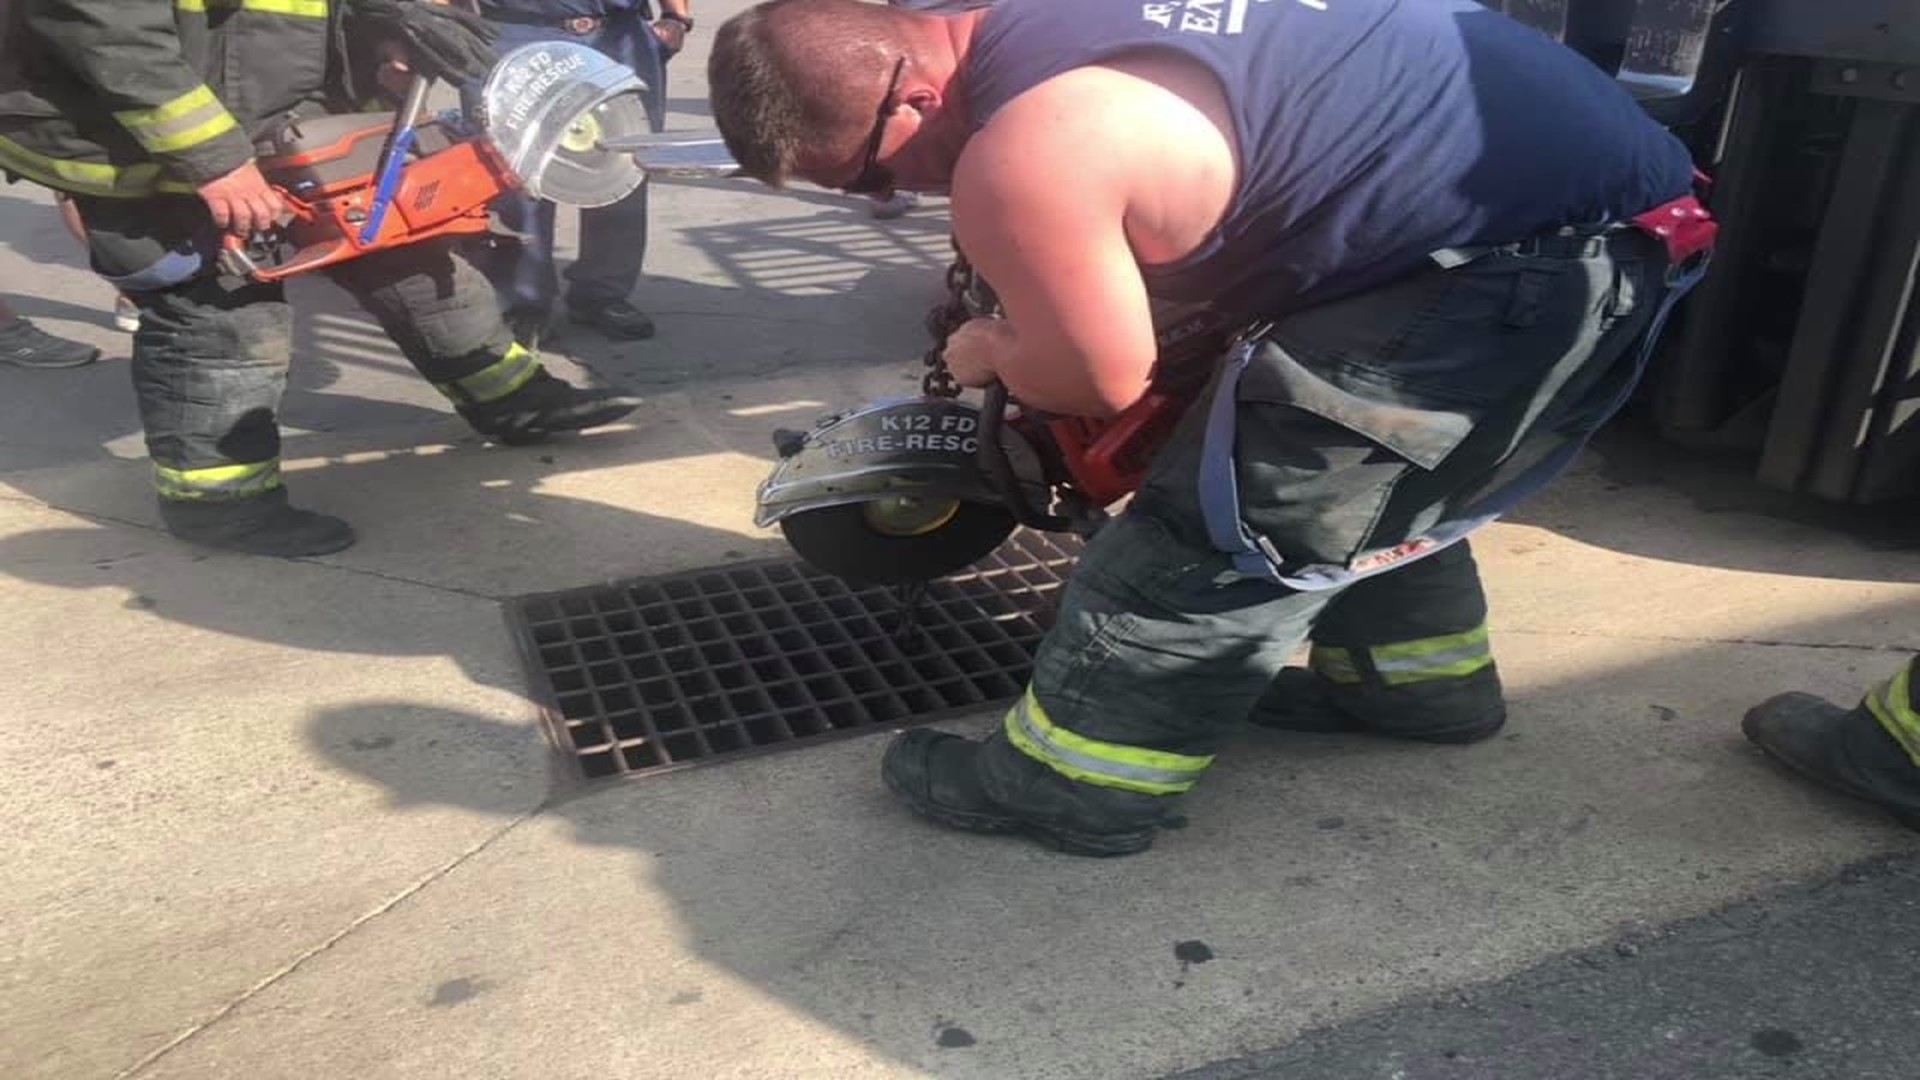 The fire department used industrial saws to cut a sewer grate and free the man.